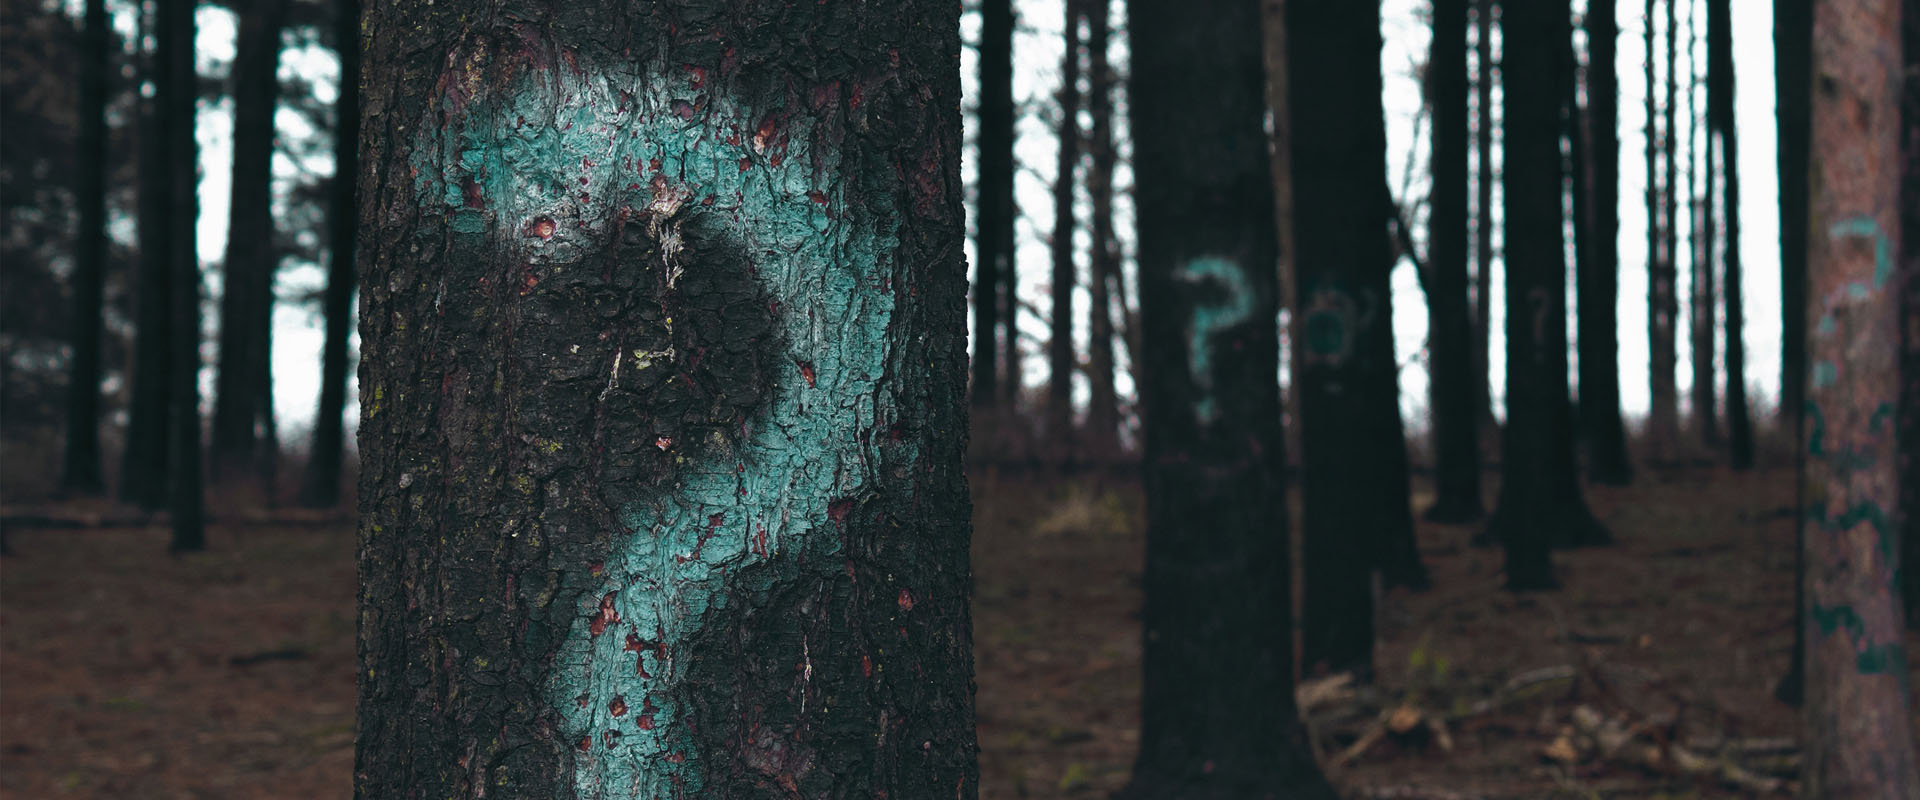 Question marks spray painted on trees in a forest - questions to ask customers